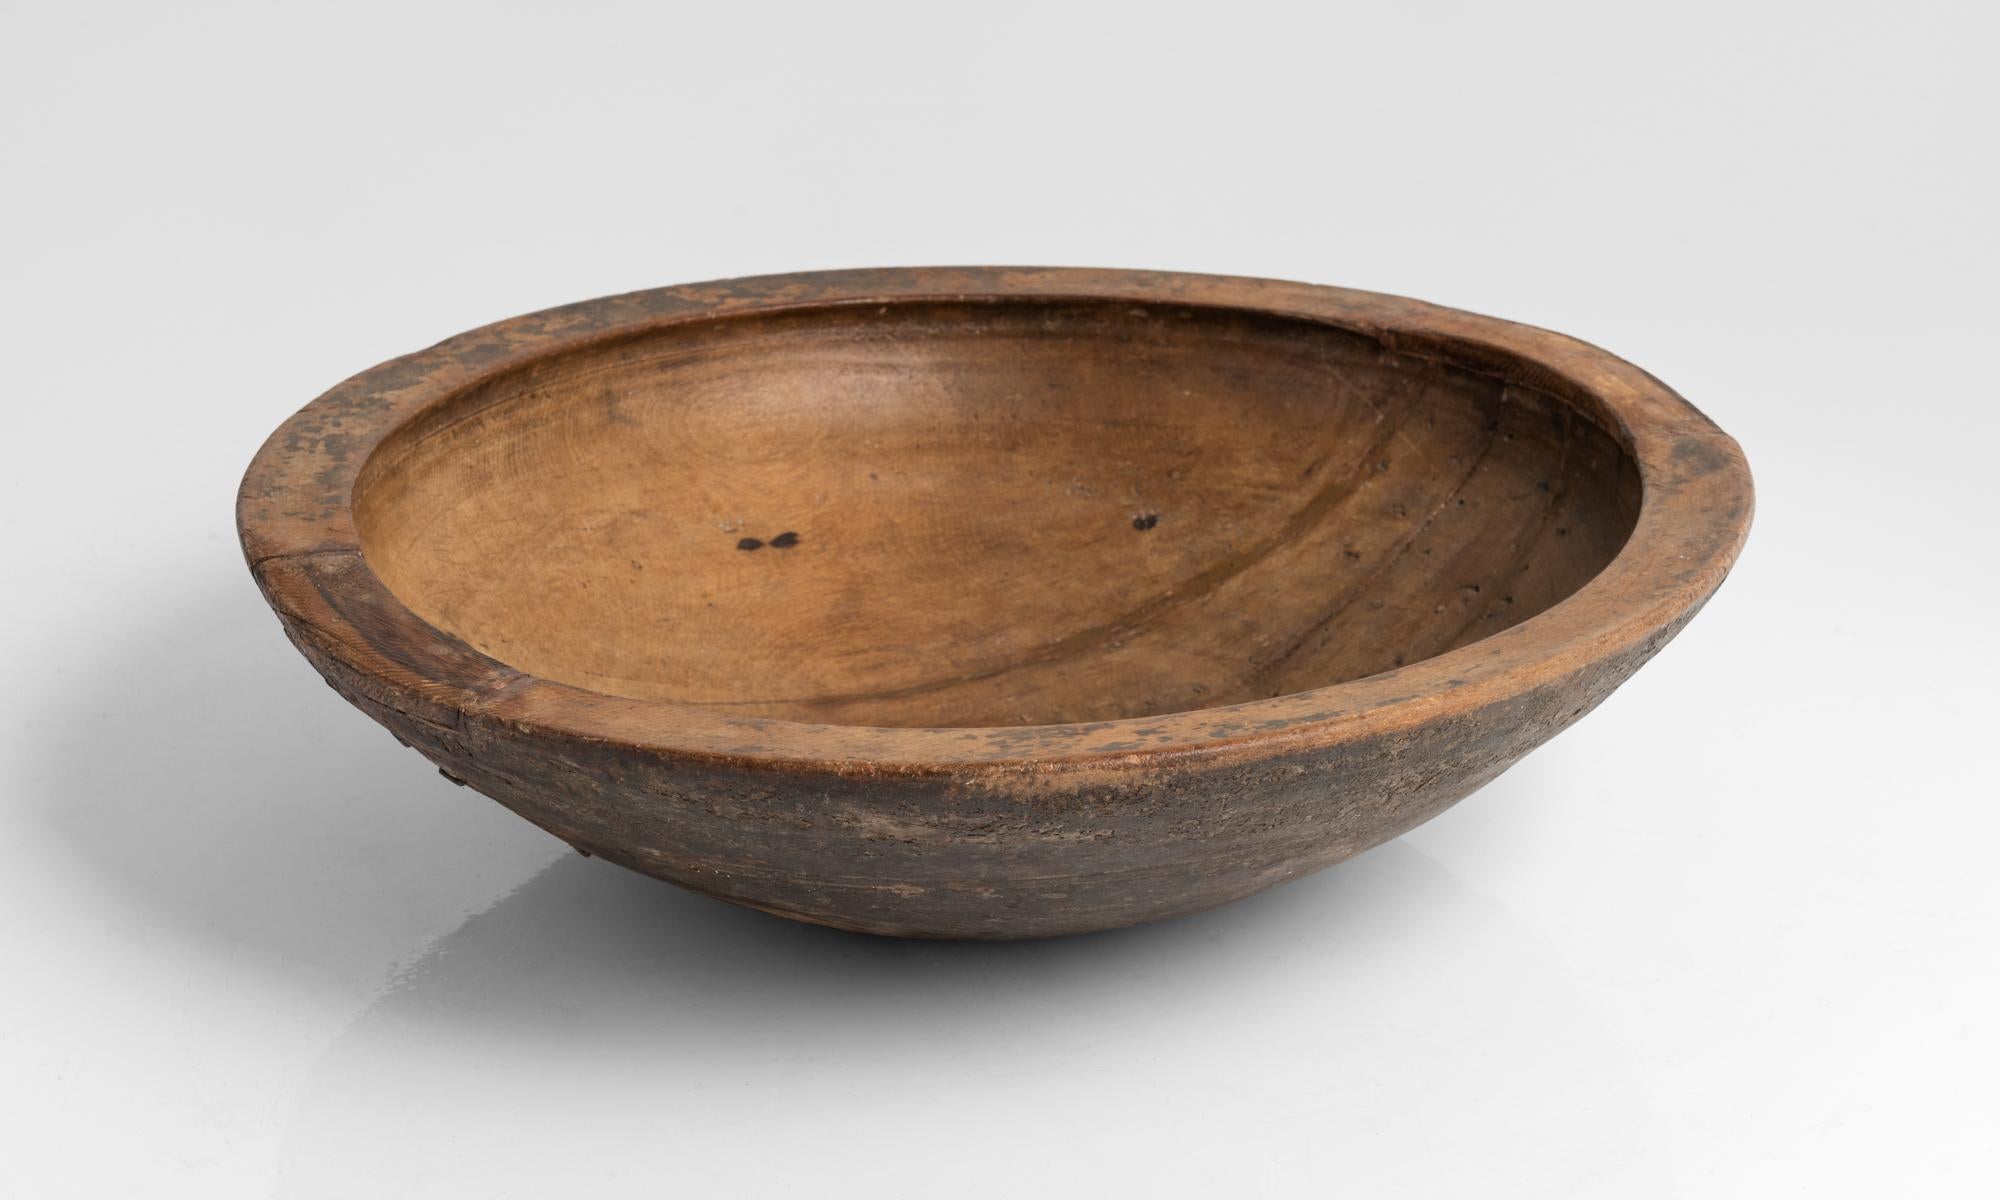 Huge sycamore dairy bowl, England, 19th century

Beautifully carved, with period repairs on bottom.